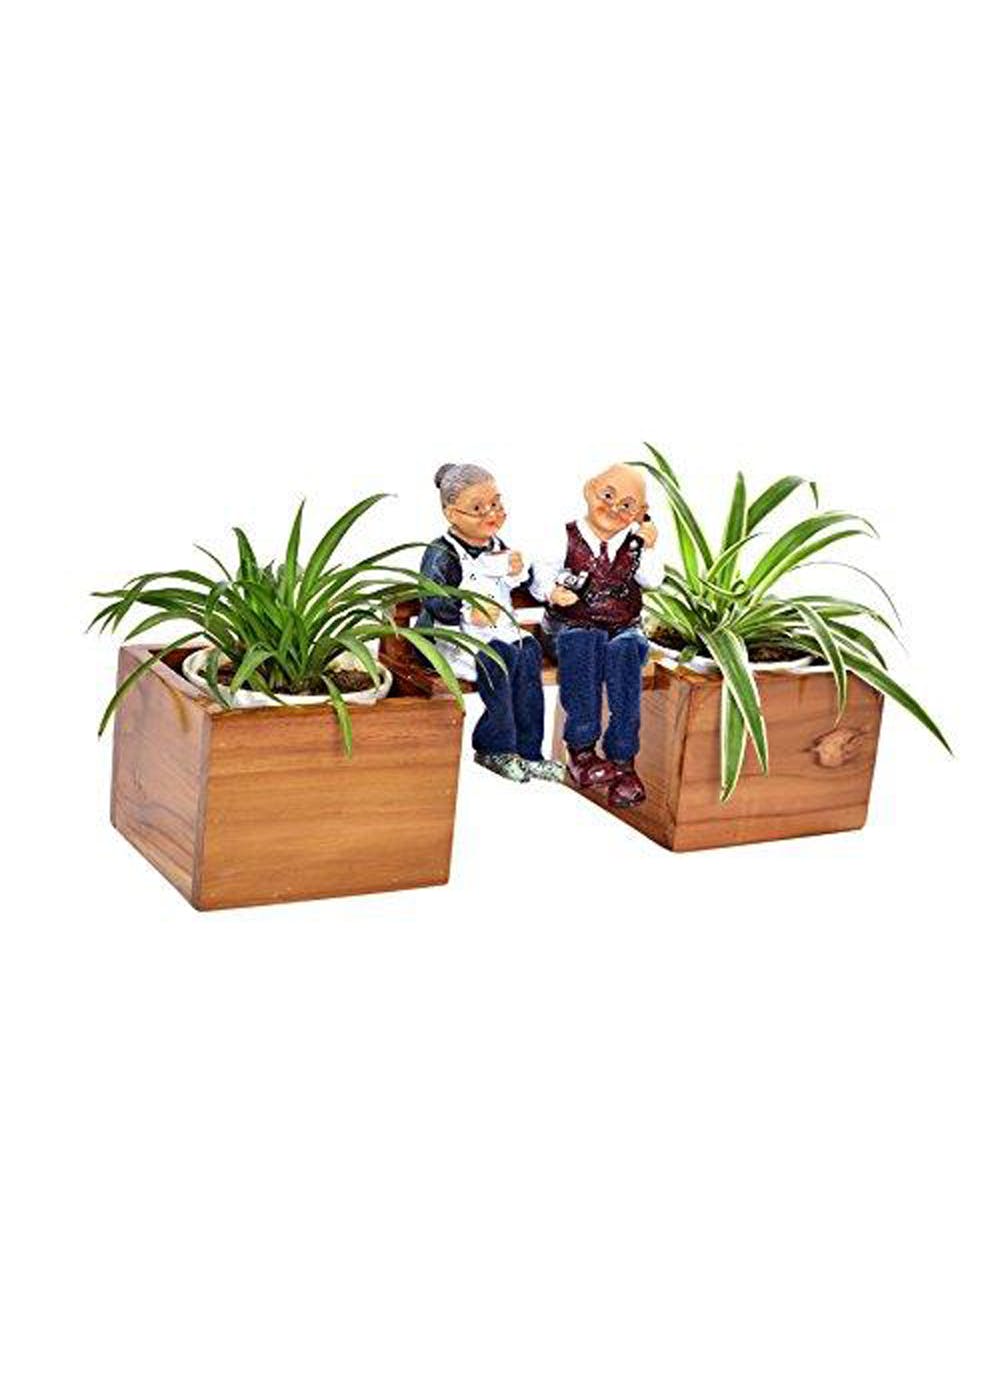 Old Couple Wooden Bench Planter